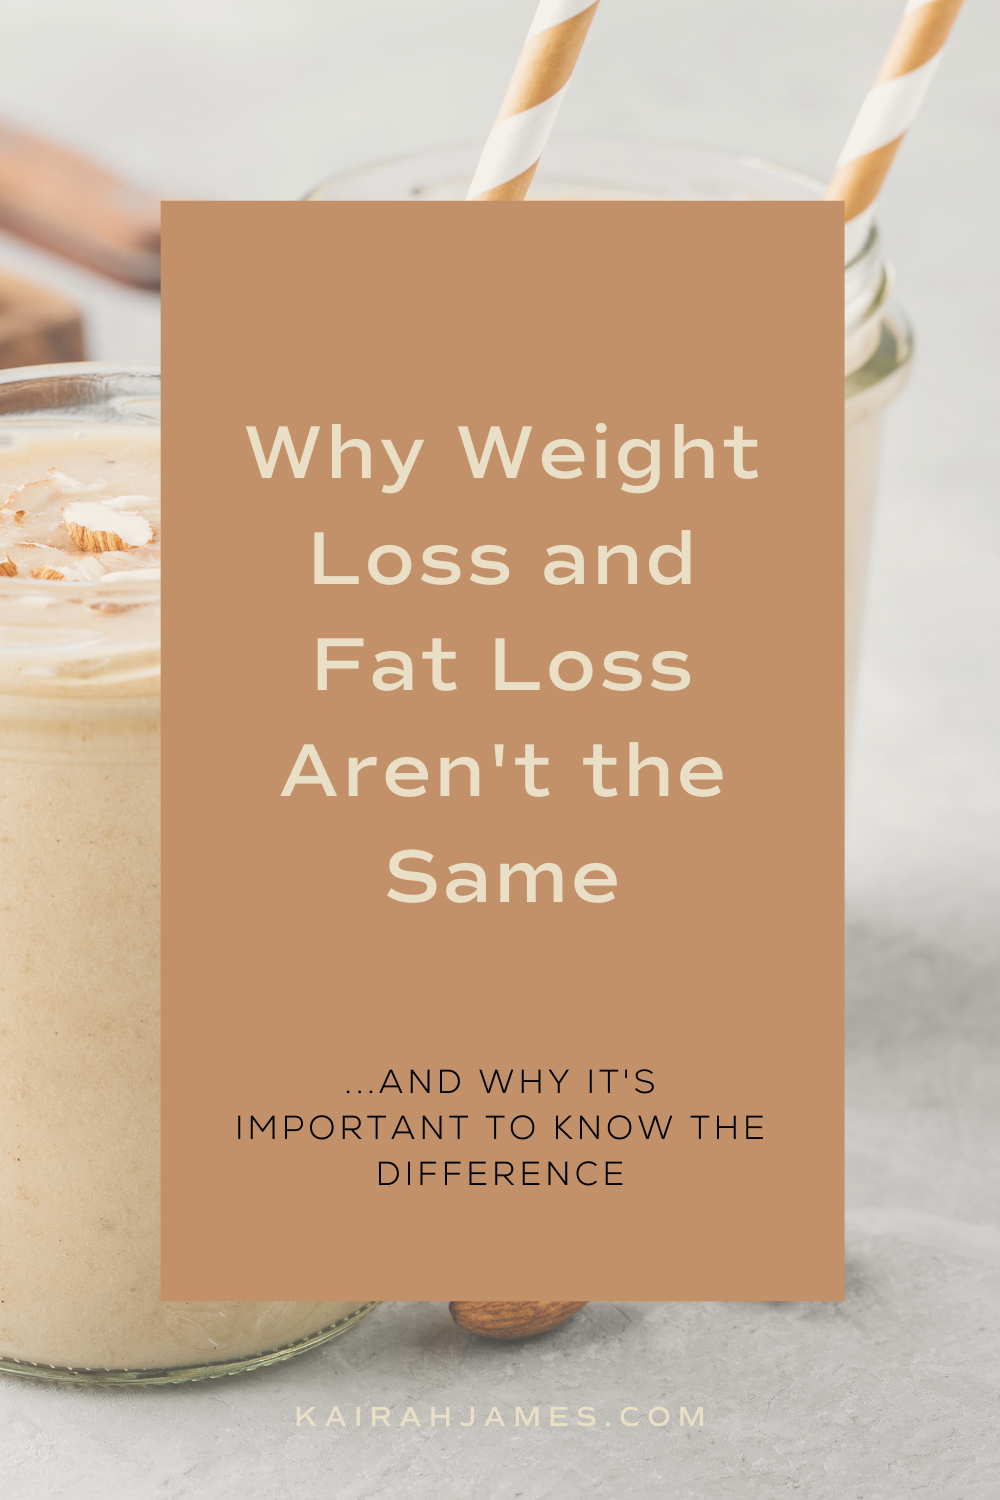 Why You Should Know the Difference Between Weight Loss and Fat Loss